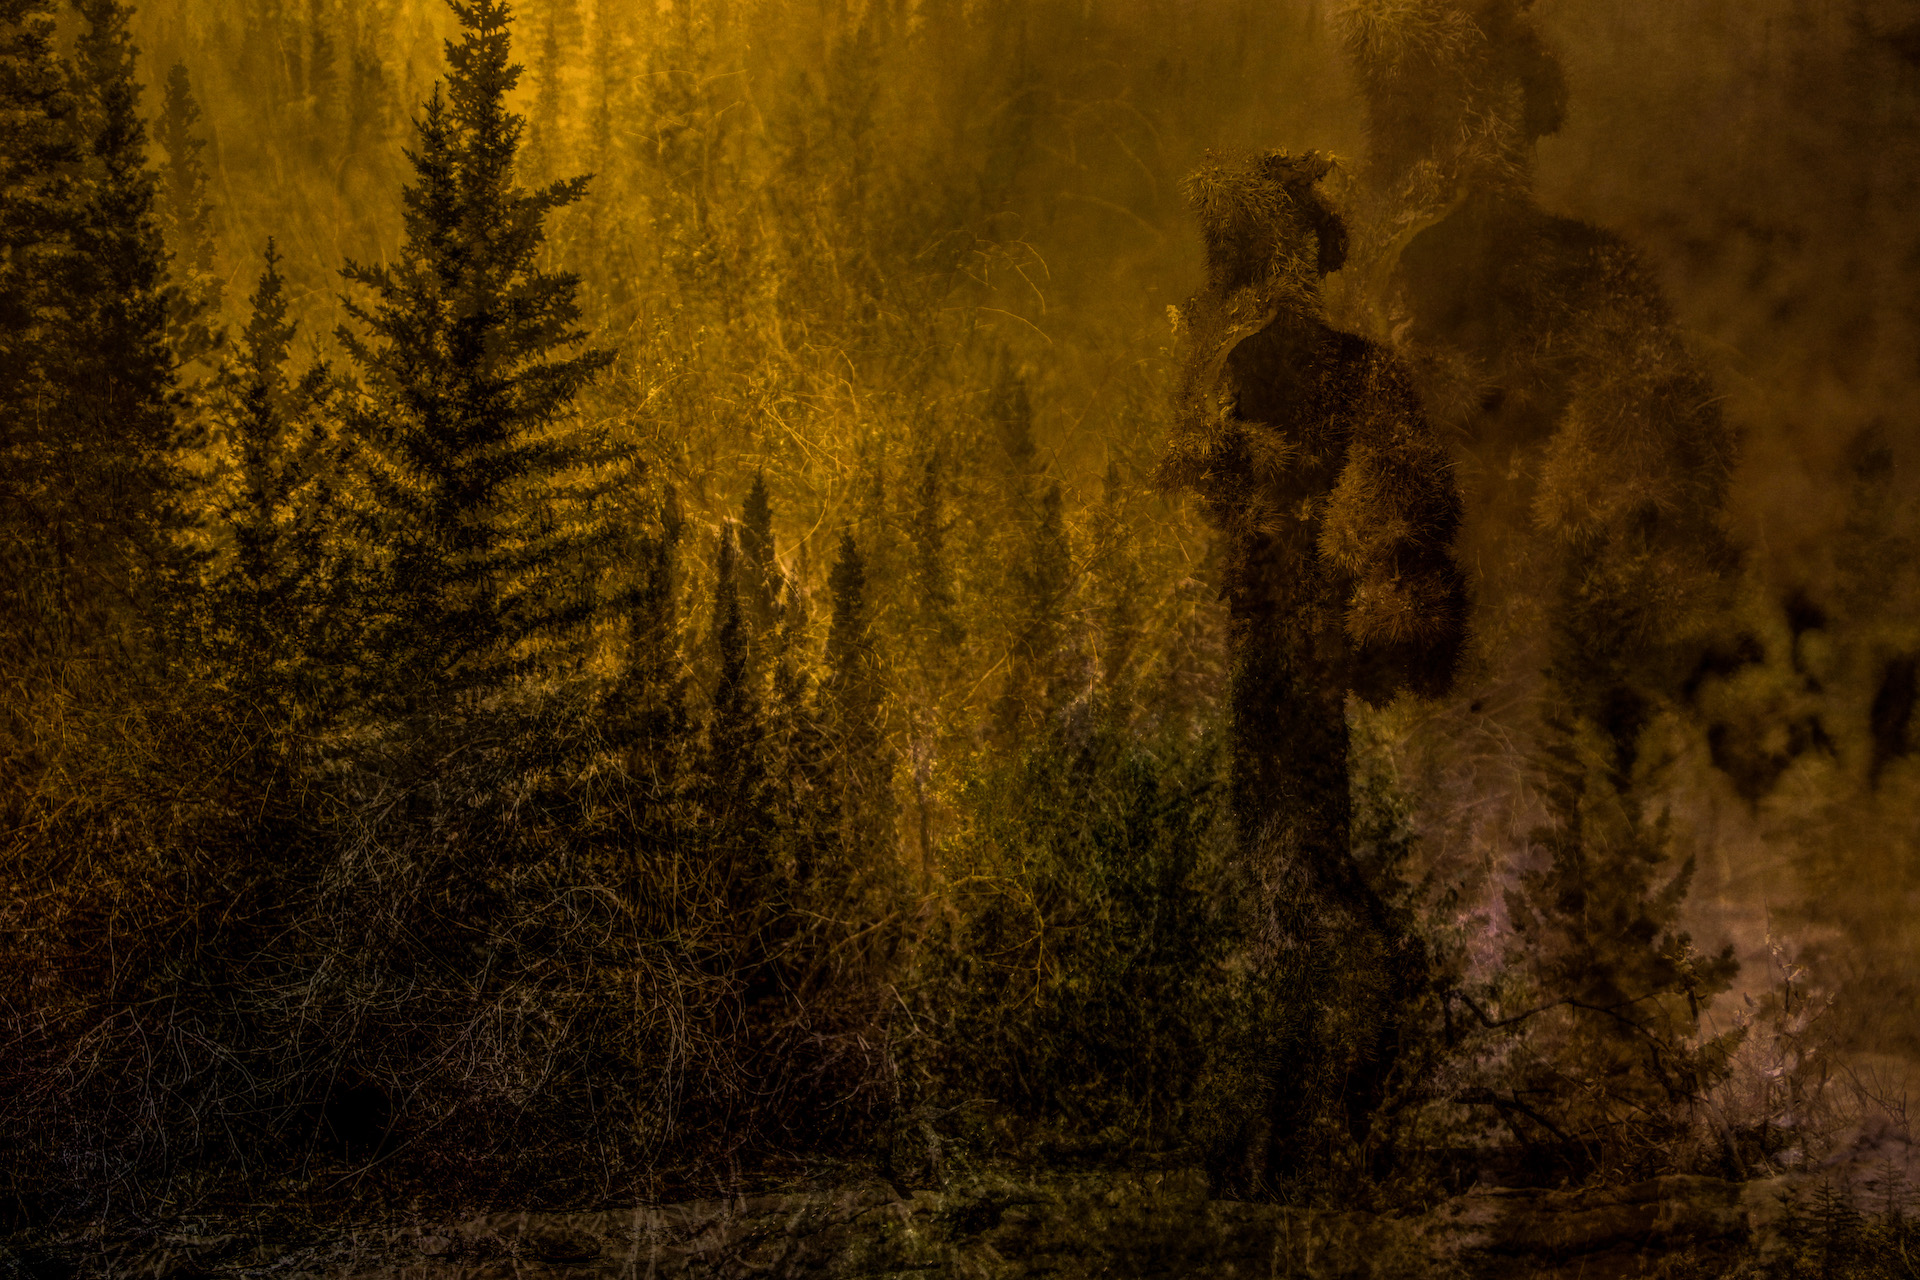 In this striking layered image, we see a vast pine forest. The palette has been manipulated so that the entire image is gold and amber tones. At the right side stand two figures. Upon closer inspection, the viewer realizes that they are not human, but rather cacti that grew to resemble people.